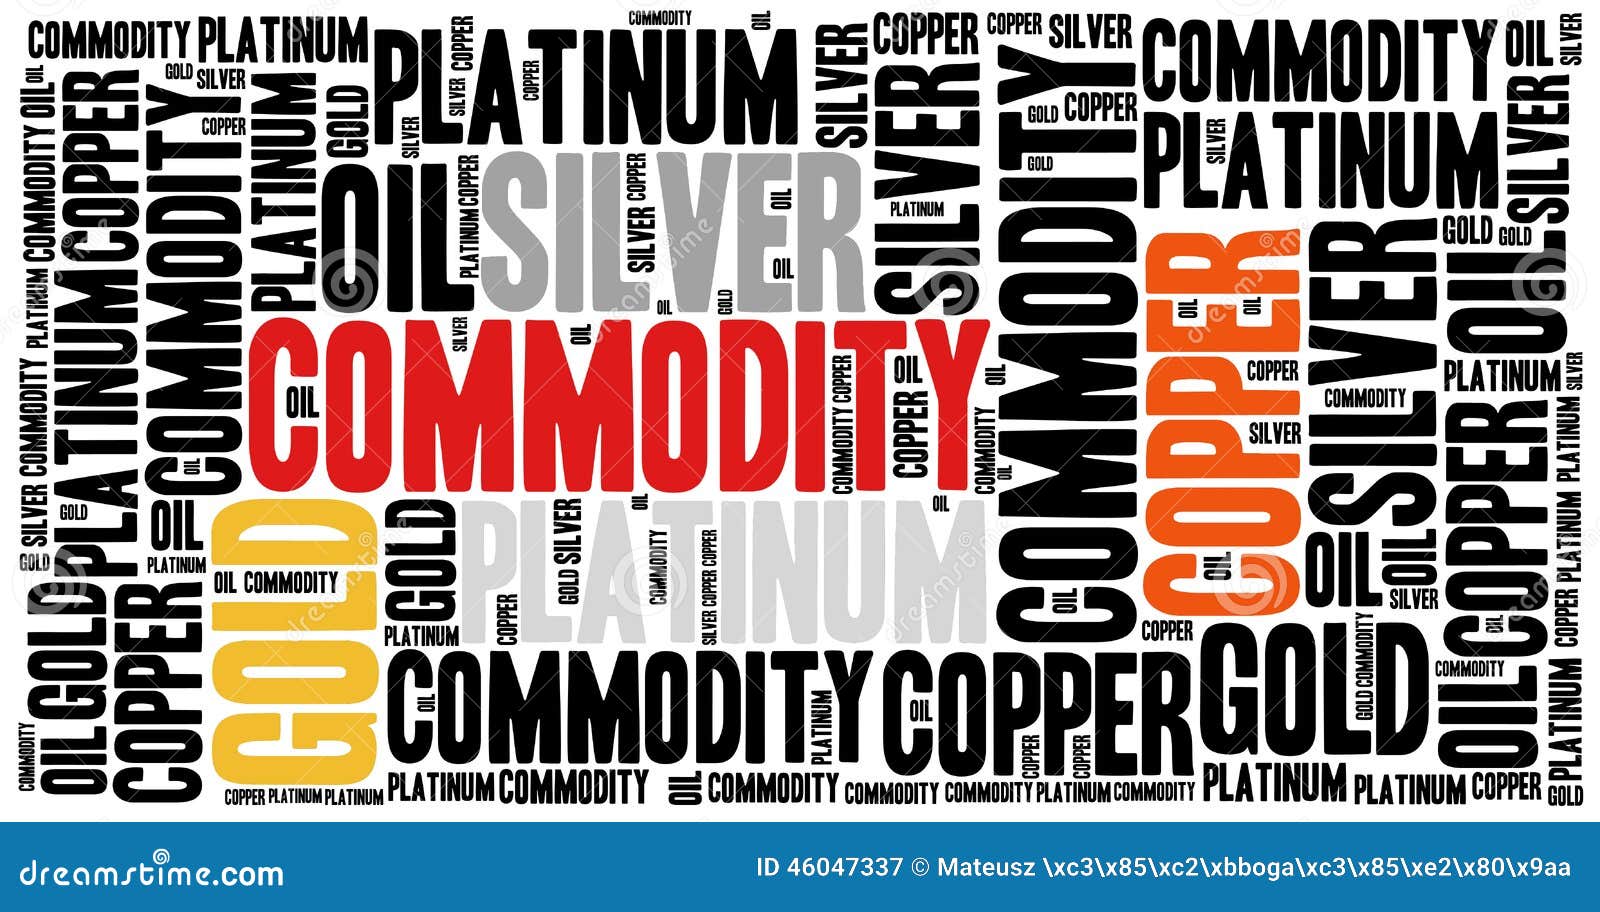 commodity stock market or trading concept.